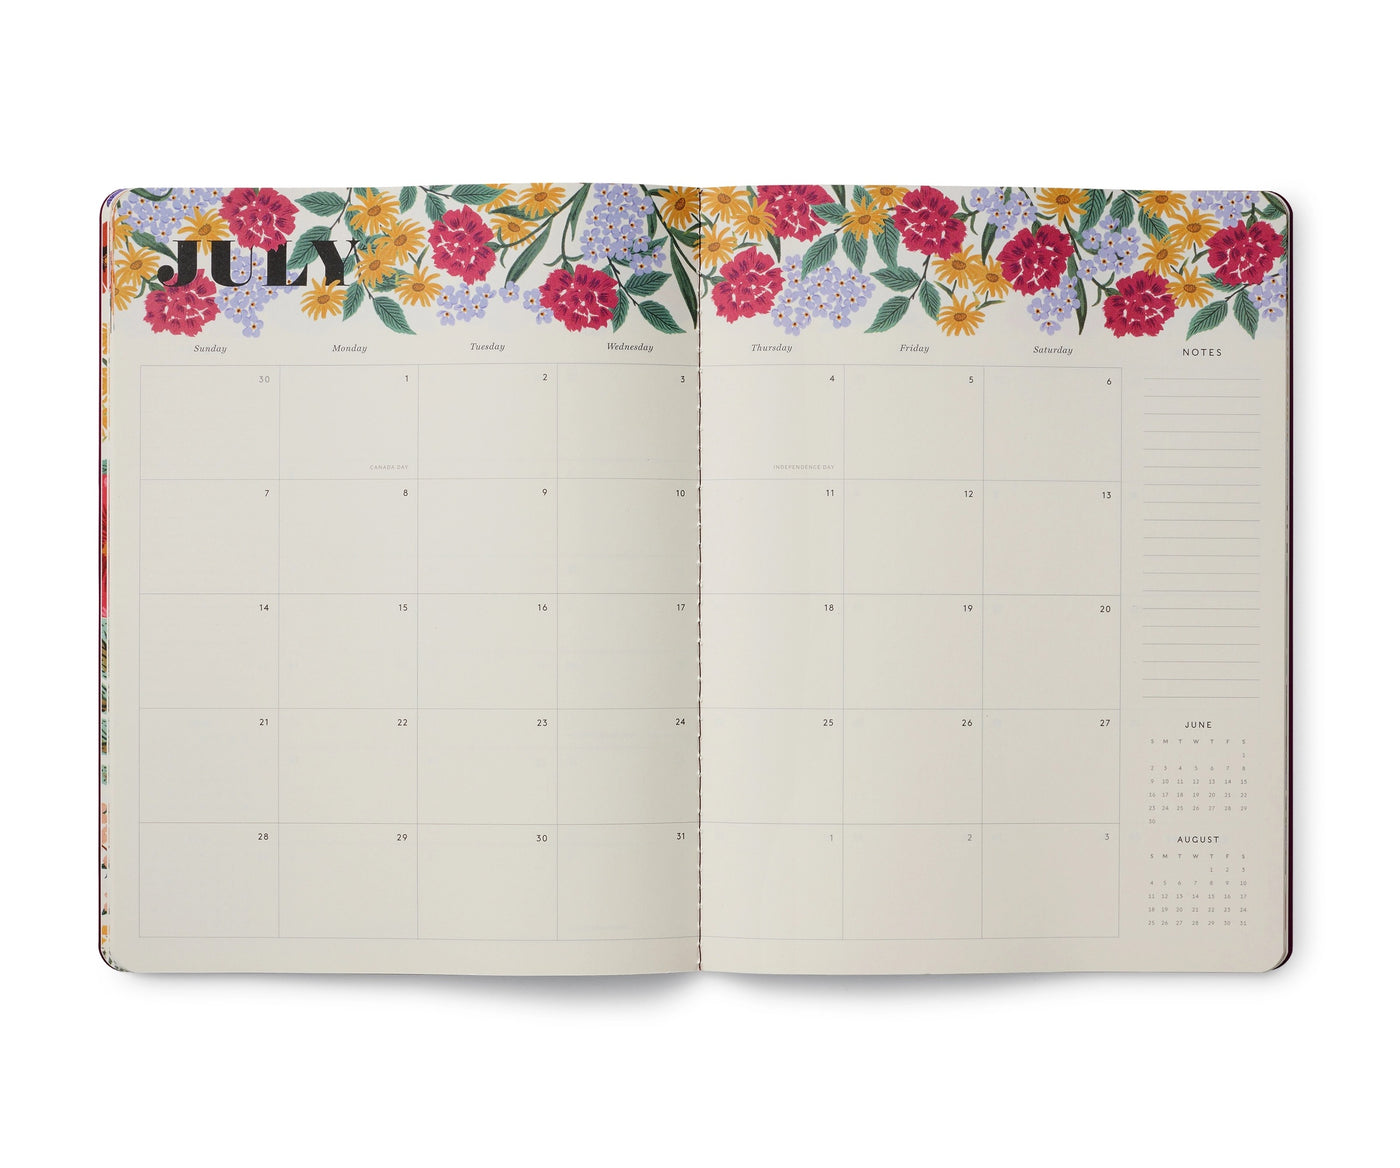 2024 Blossom Monthly Planner